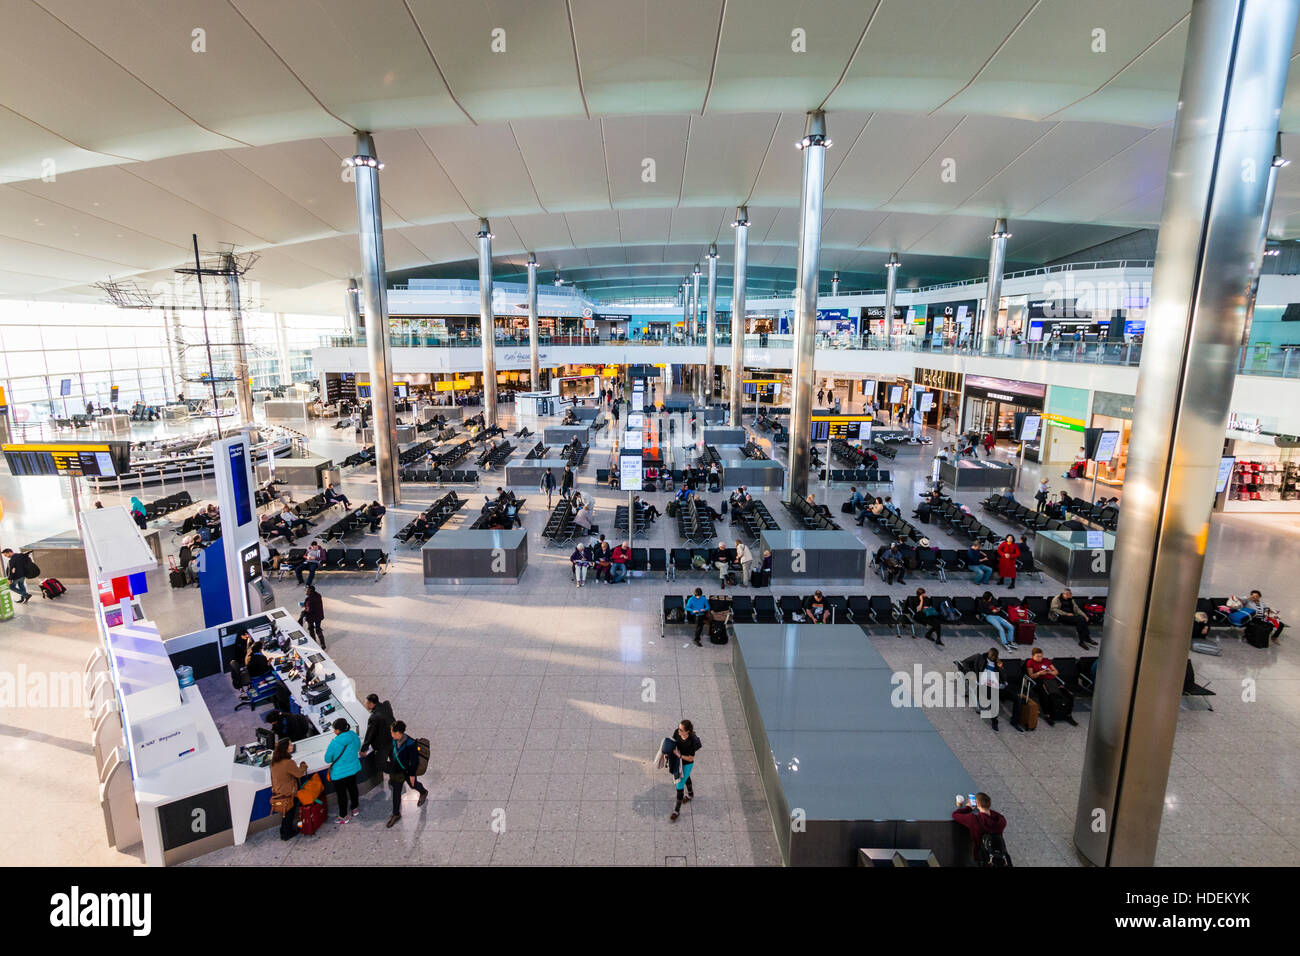 London, Heathrow airport, Terminal 2. Departure lounge interior. Overhead wide angle view of main seating area, not very busy, daytime. Stock Photo